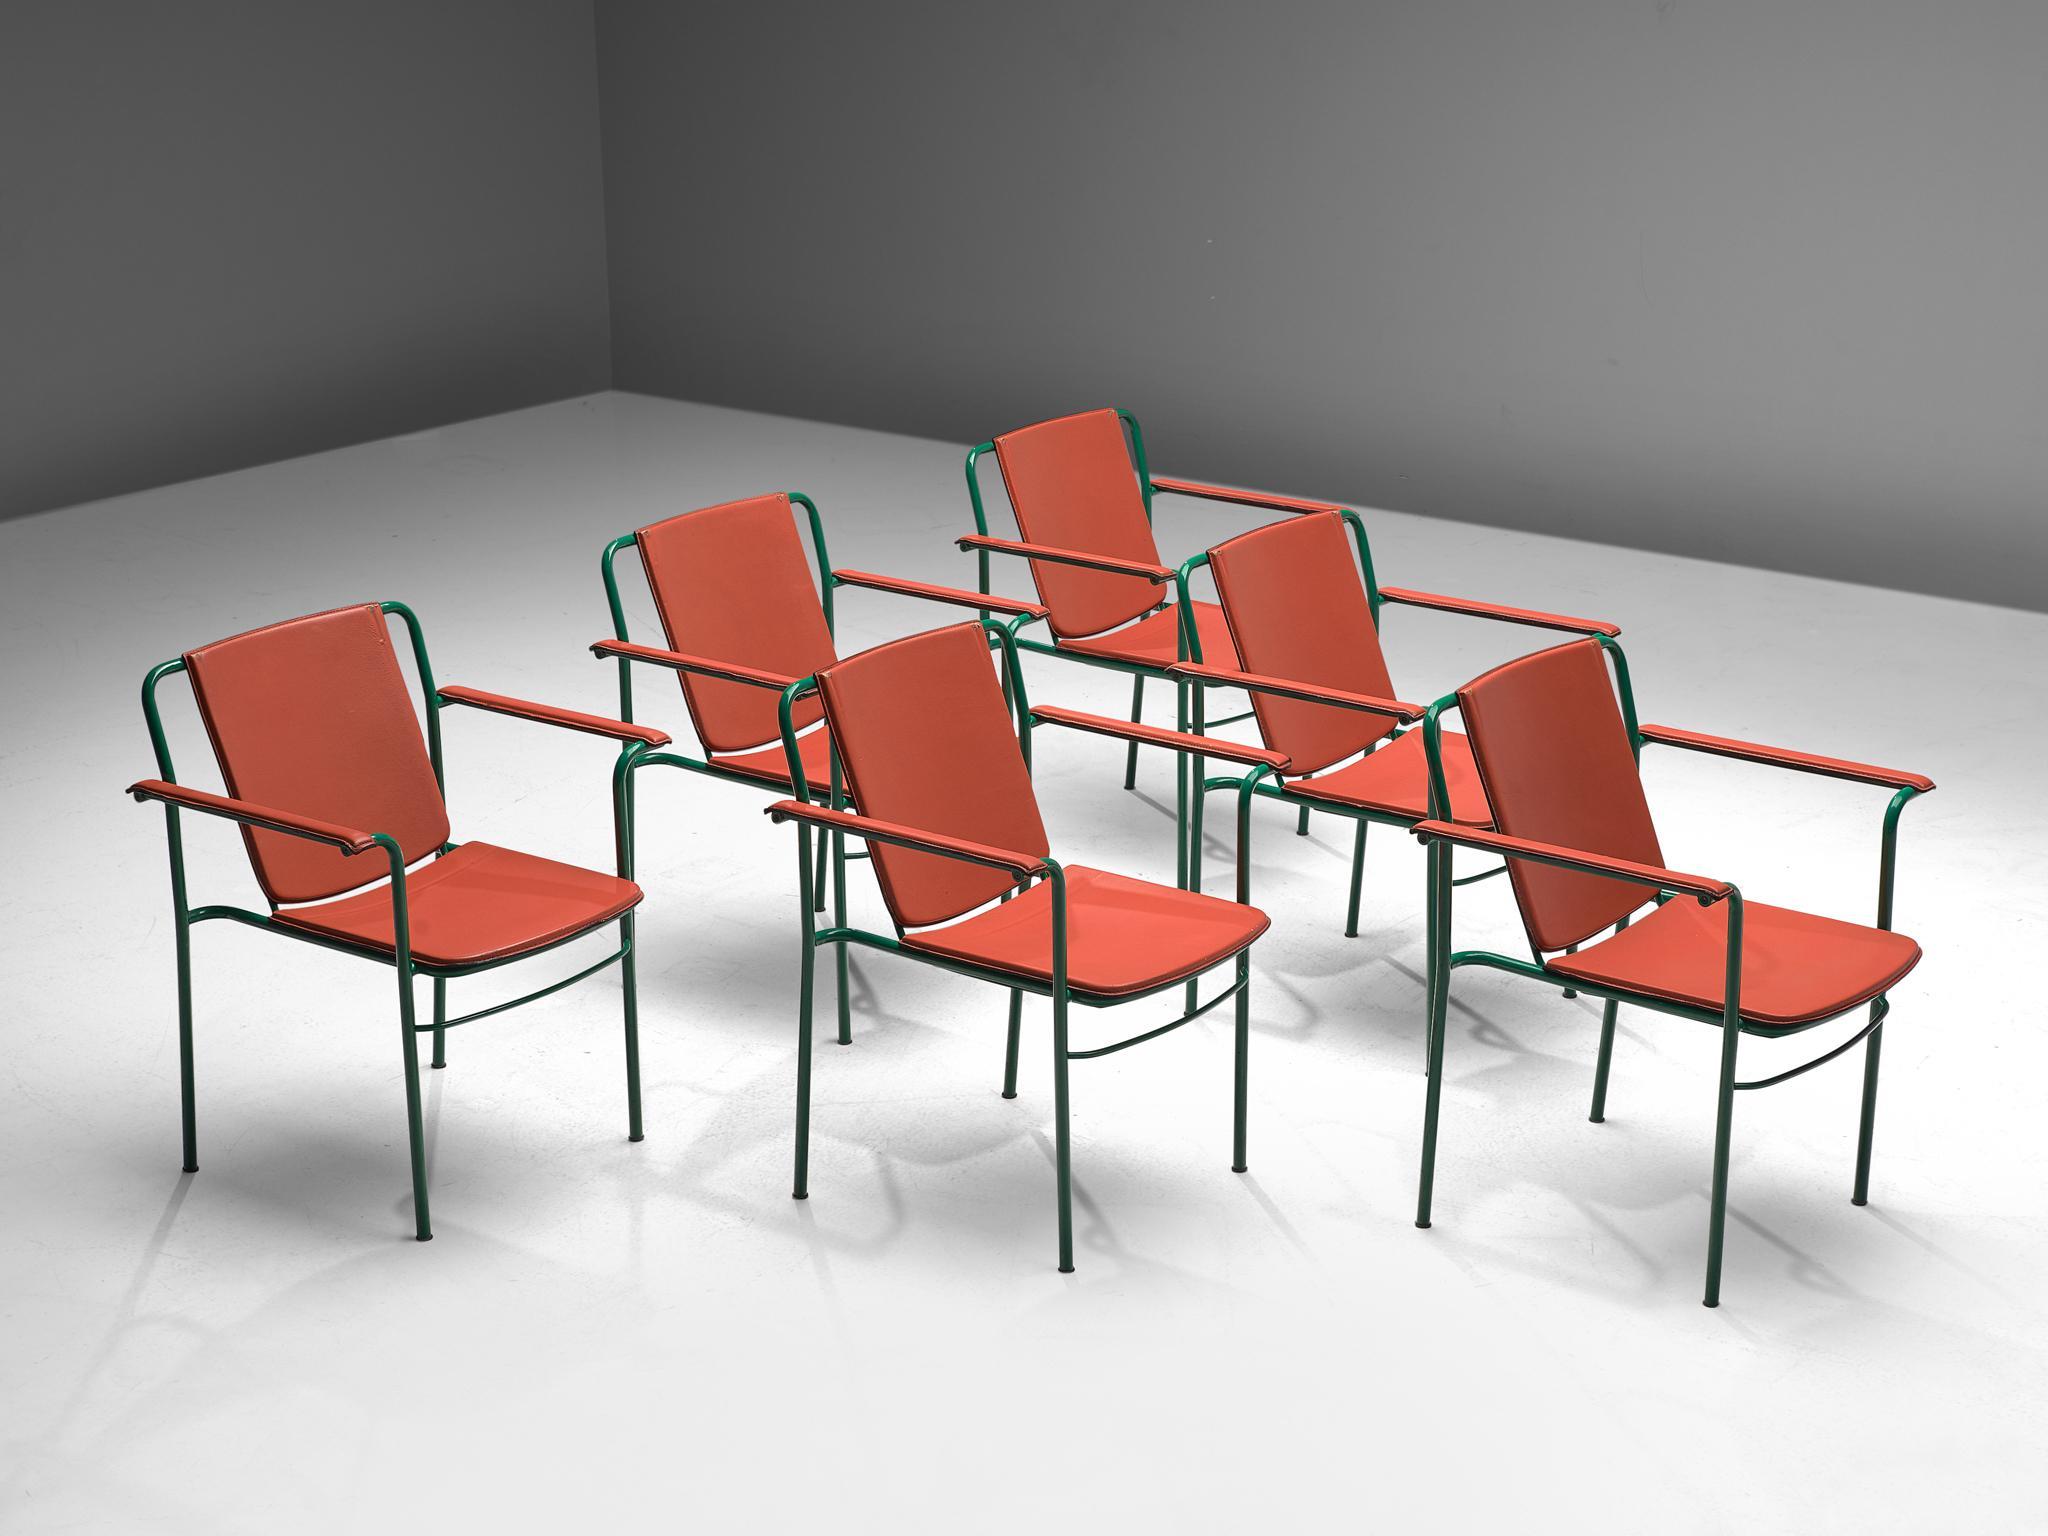 Late 20th Century Mario Marenco for Poltrona Frau Set of 12 'Movie' Chairs